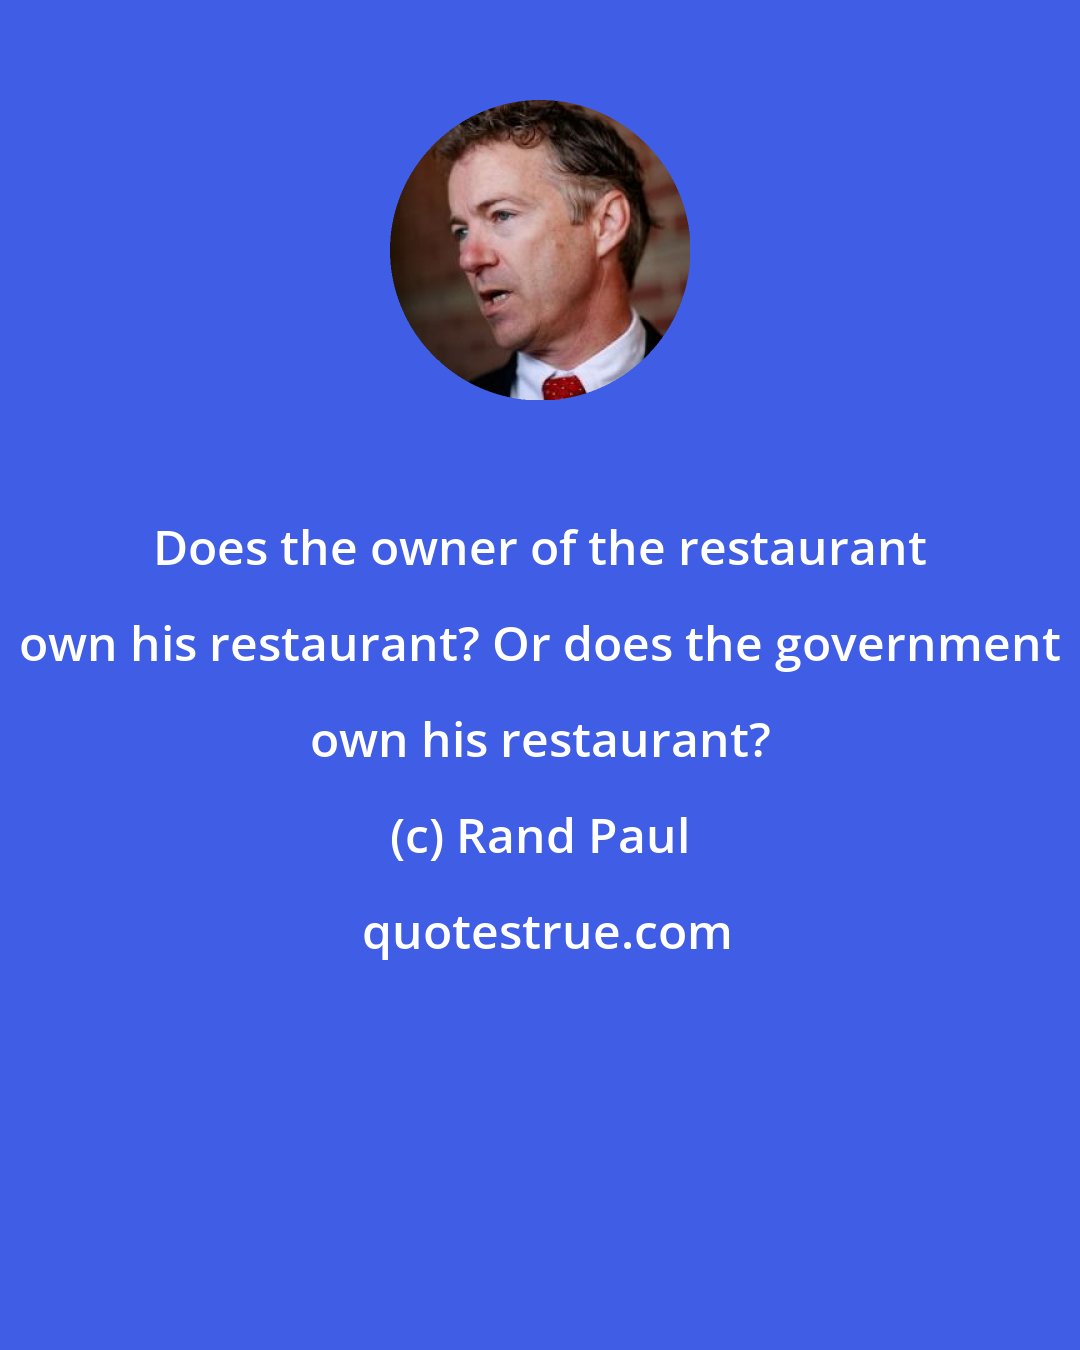 Rand Paul: Does the owner of the restaurant own his restaurant? Or does the government own his restaurant?